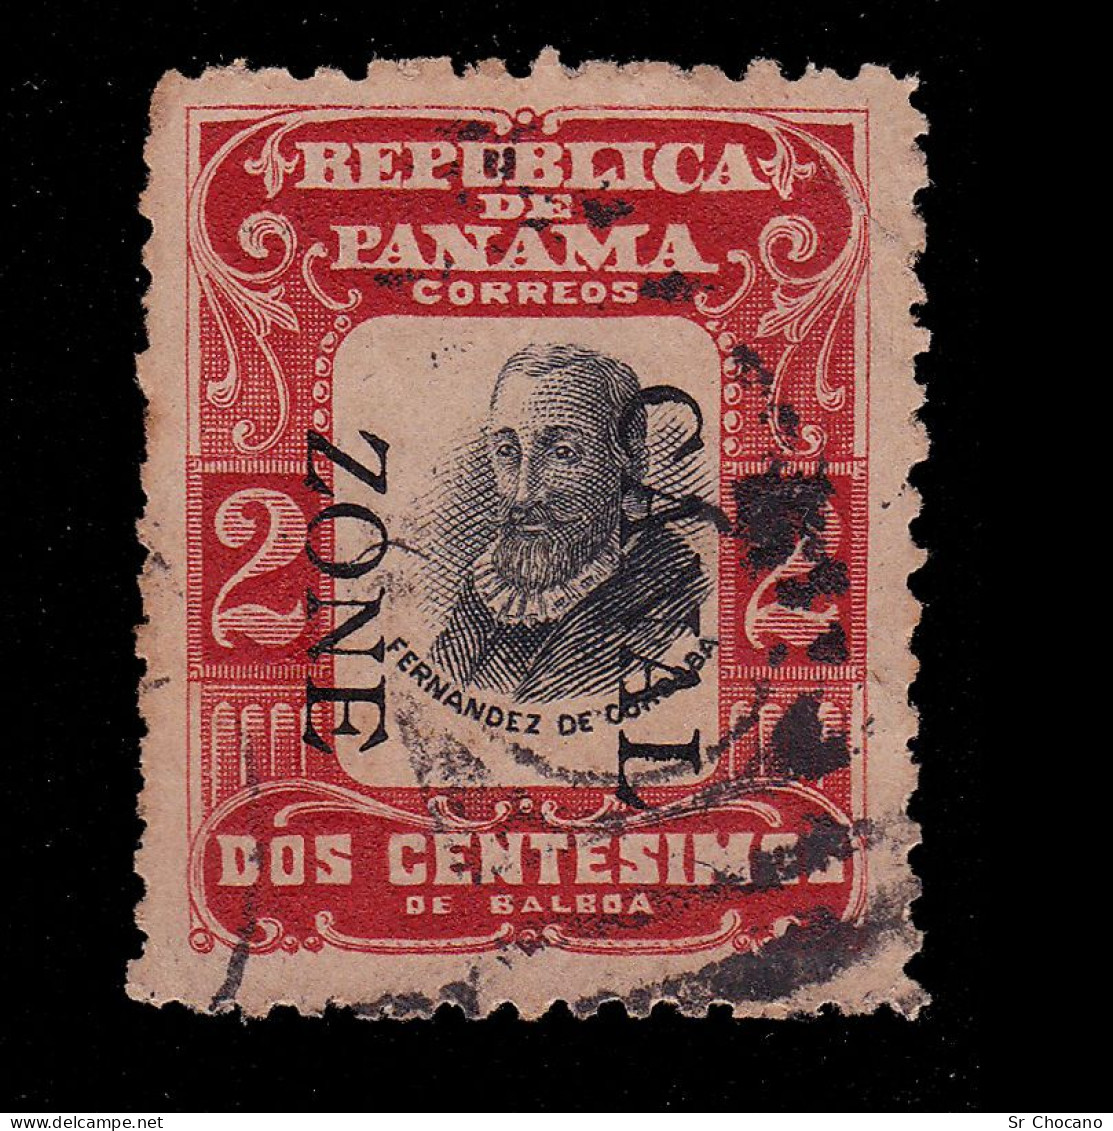 CANAL ZONE.1906-7.2c.SCOTT 21.USED.Overprint Reading Down - Canal Zone